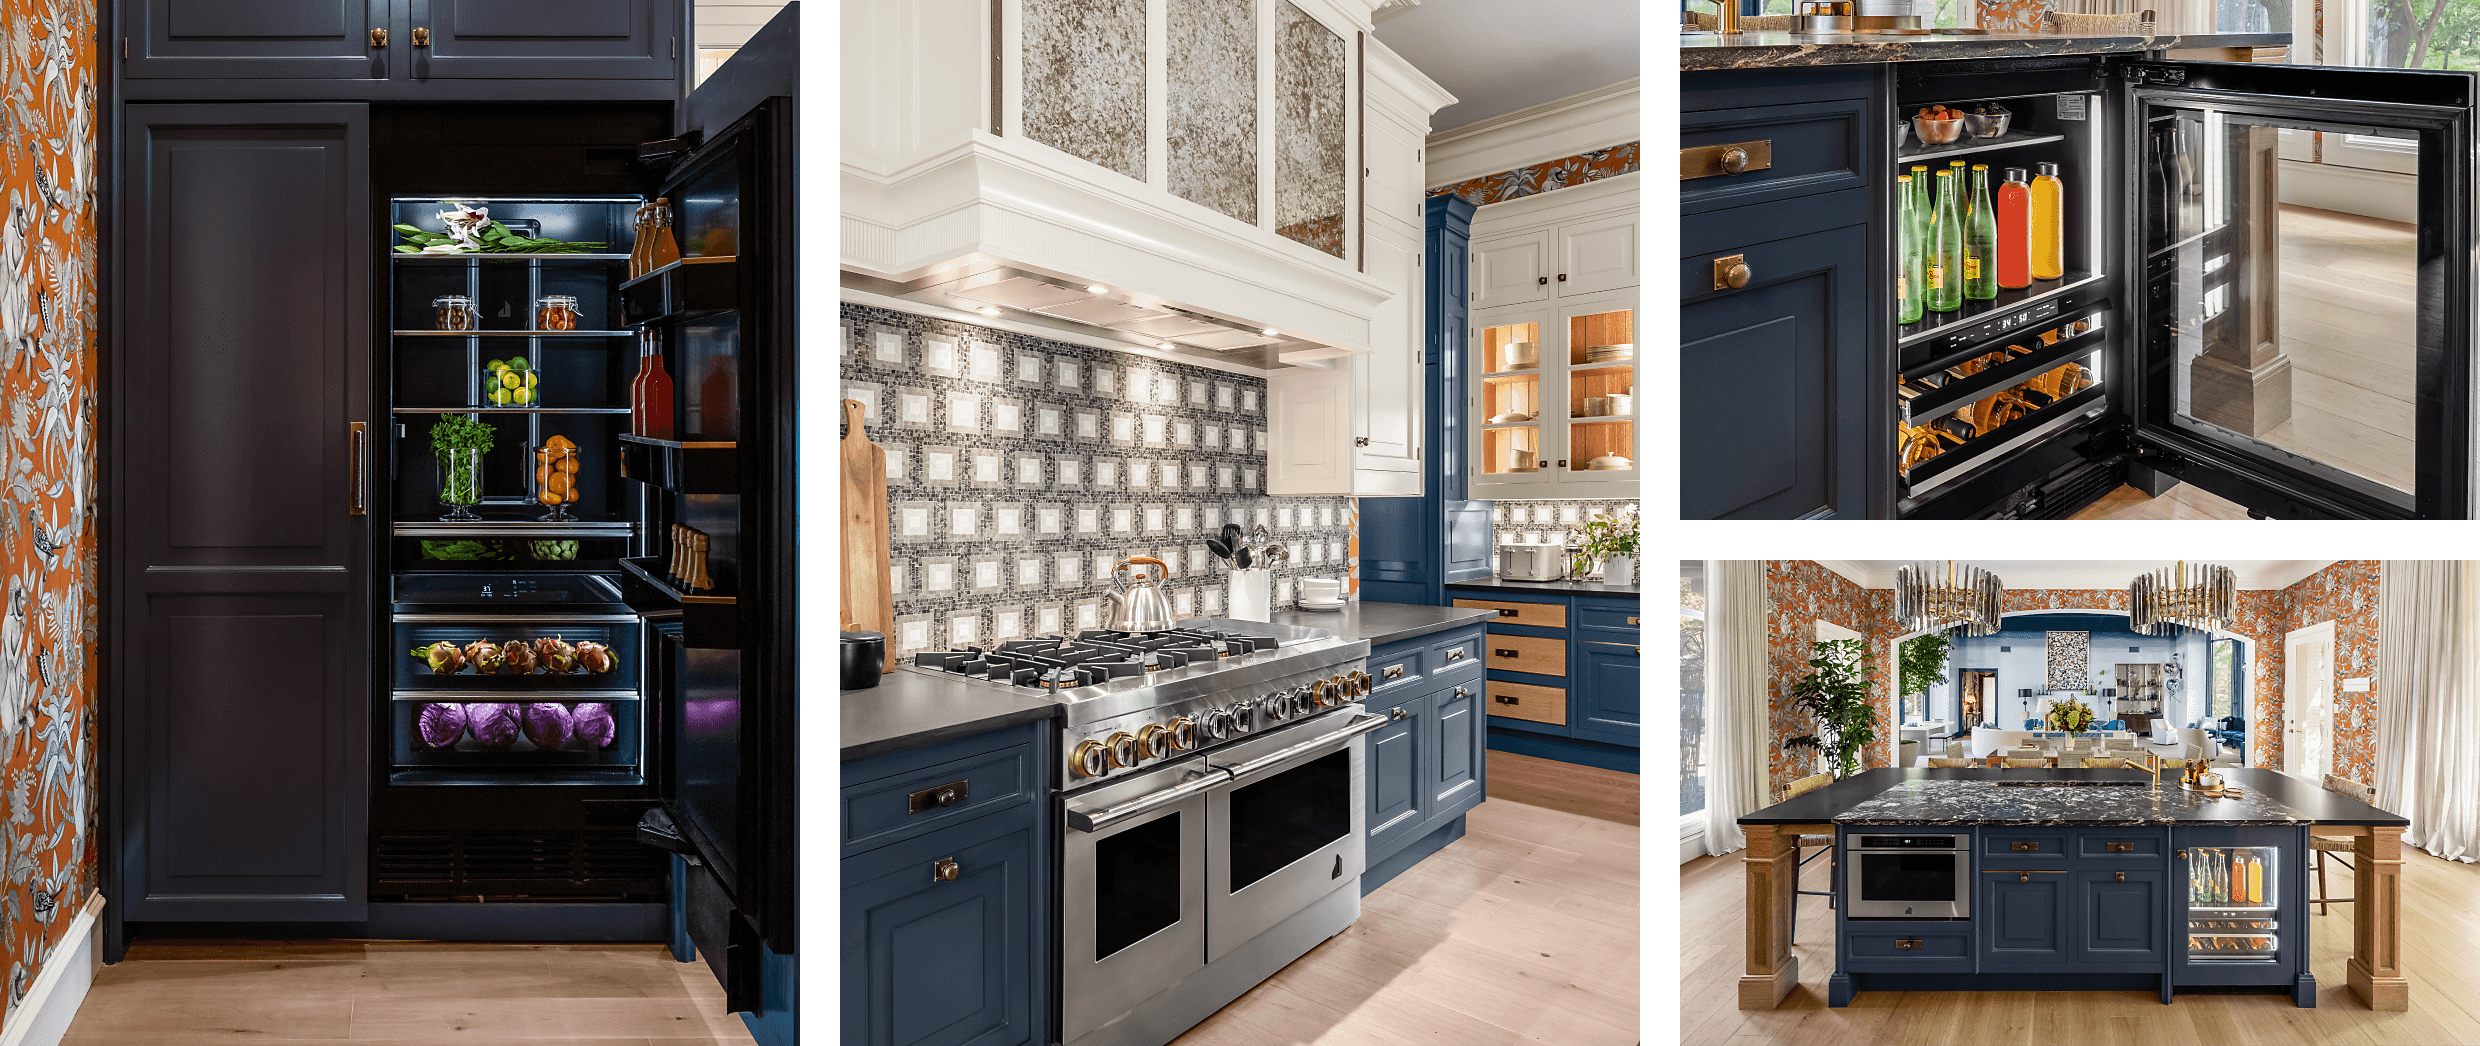 A collage of images including a pair of JennAir® Columns fitted with custom wooden panels; a JennAir® RISE™ Professional-Style Range in the kitchen; an open JennAir® Beverage Center; an overall view of the kitchen showing a microwave drawer and beverage center.